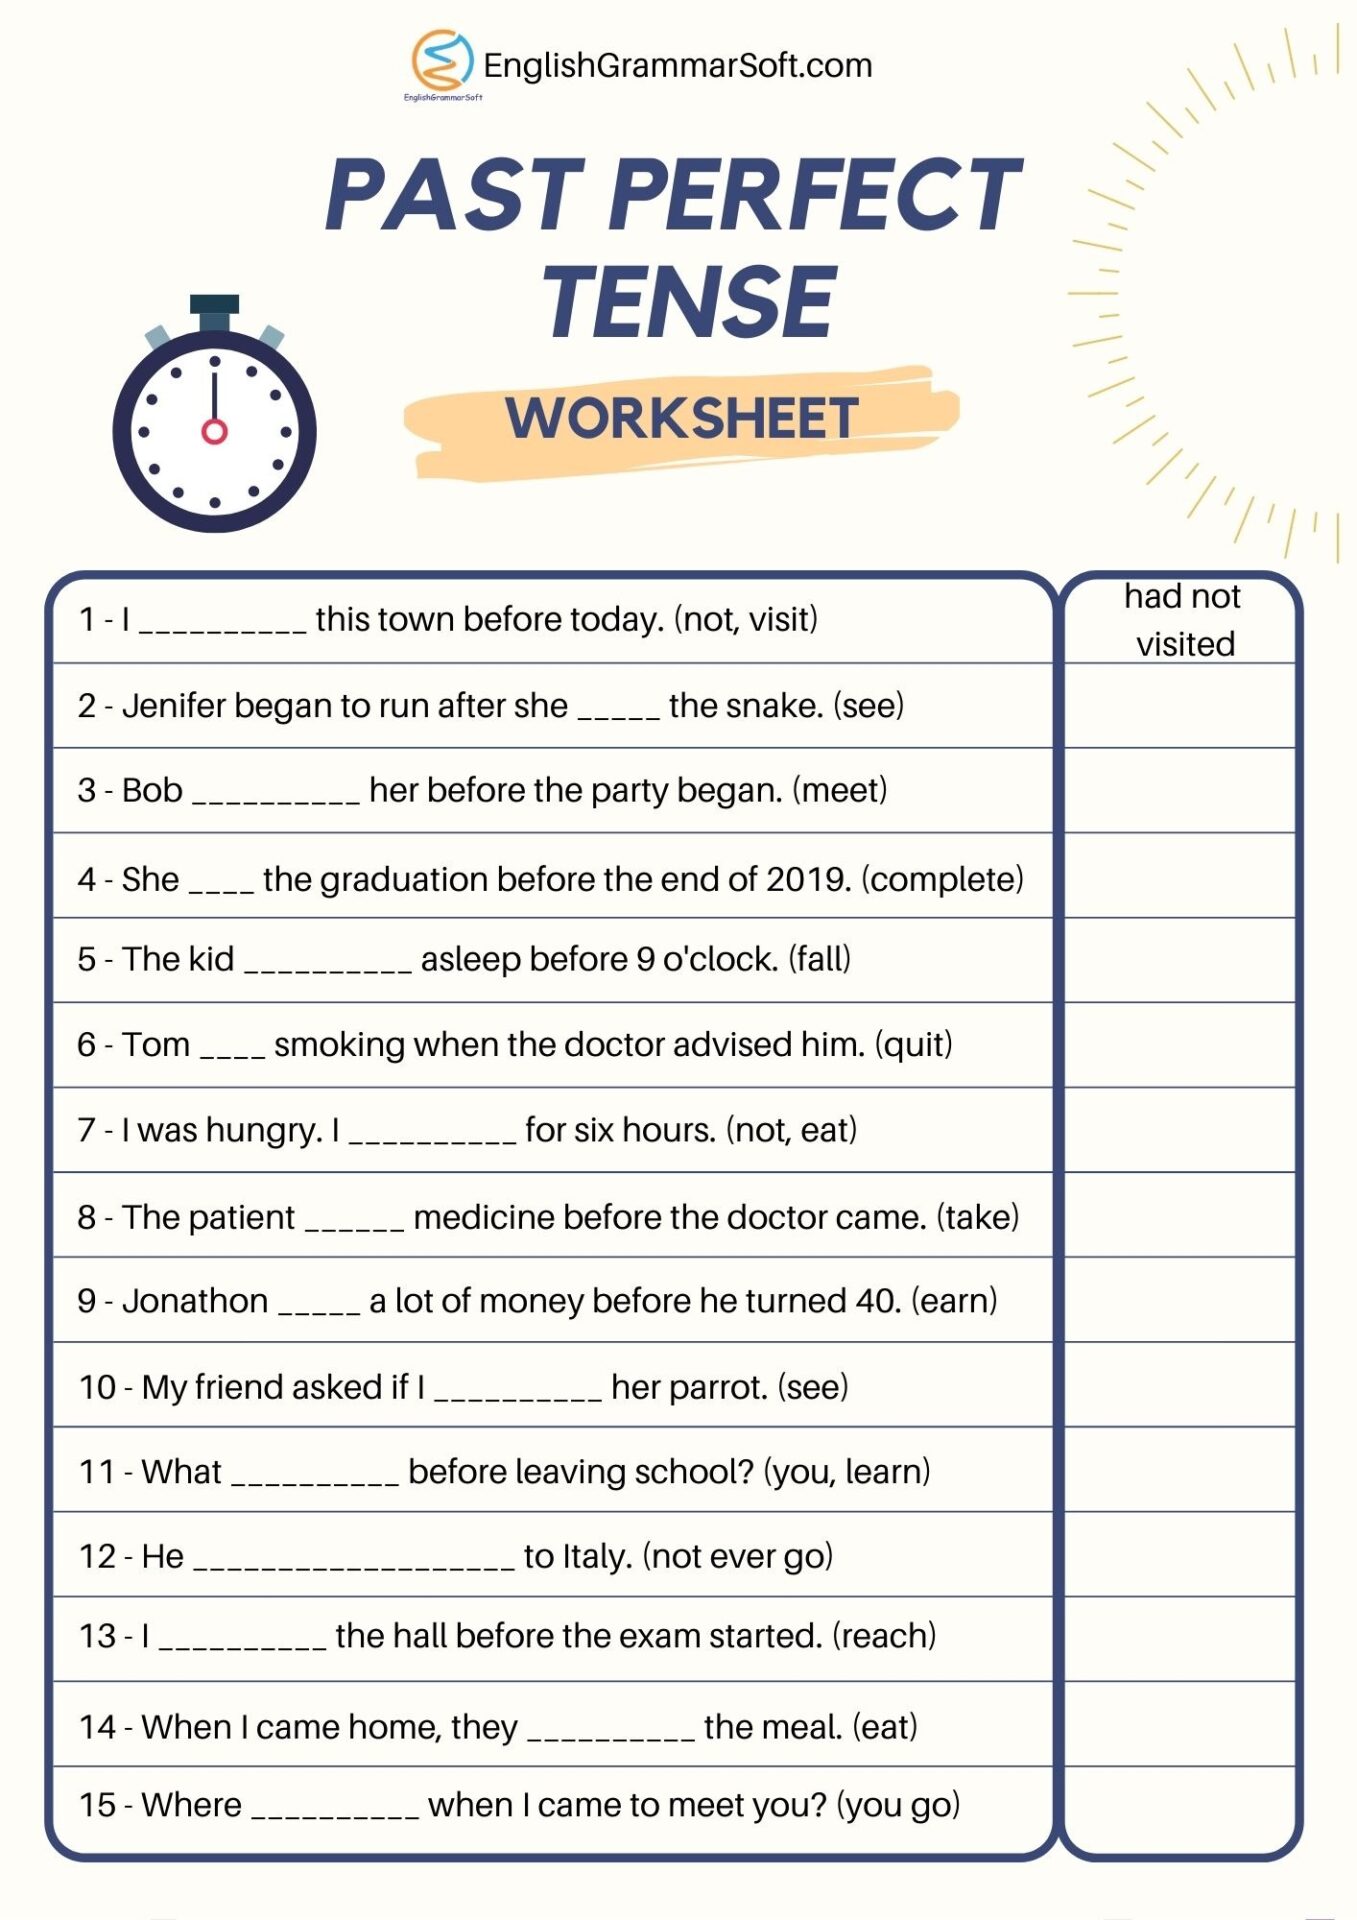 Worksheet for Past Perfect Tense